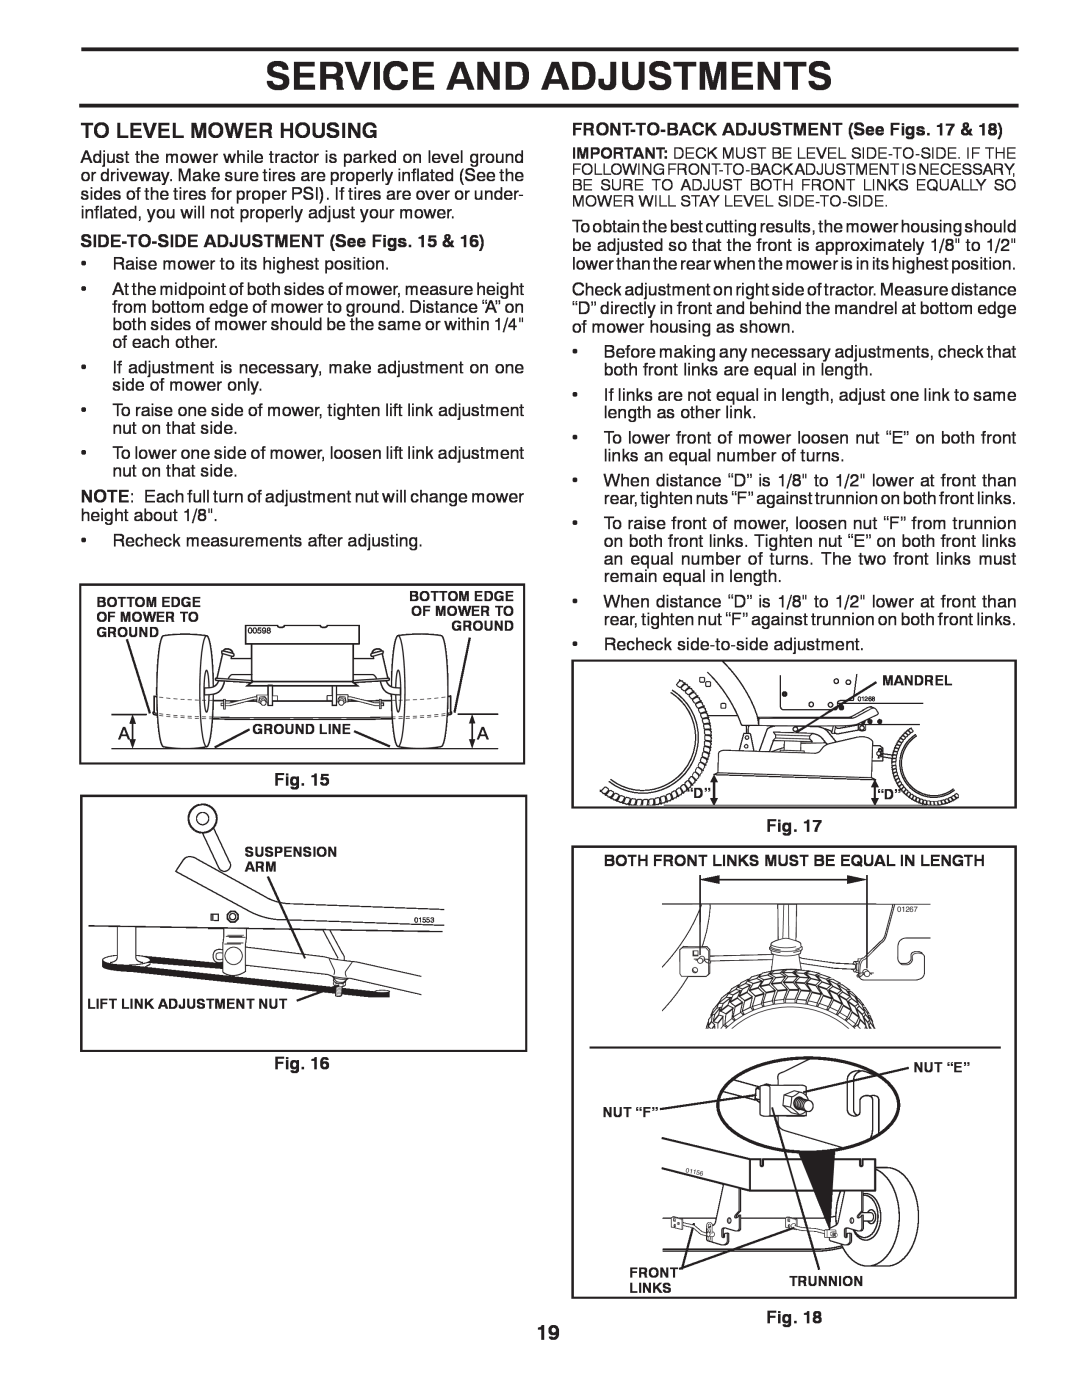 Poulan PO12538LT warranty To Level Mower Housing, Service And Adjustments, SIDE-TO-SIDEADJUSTMENT See Figs 